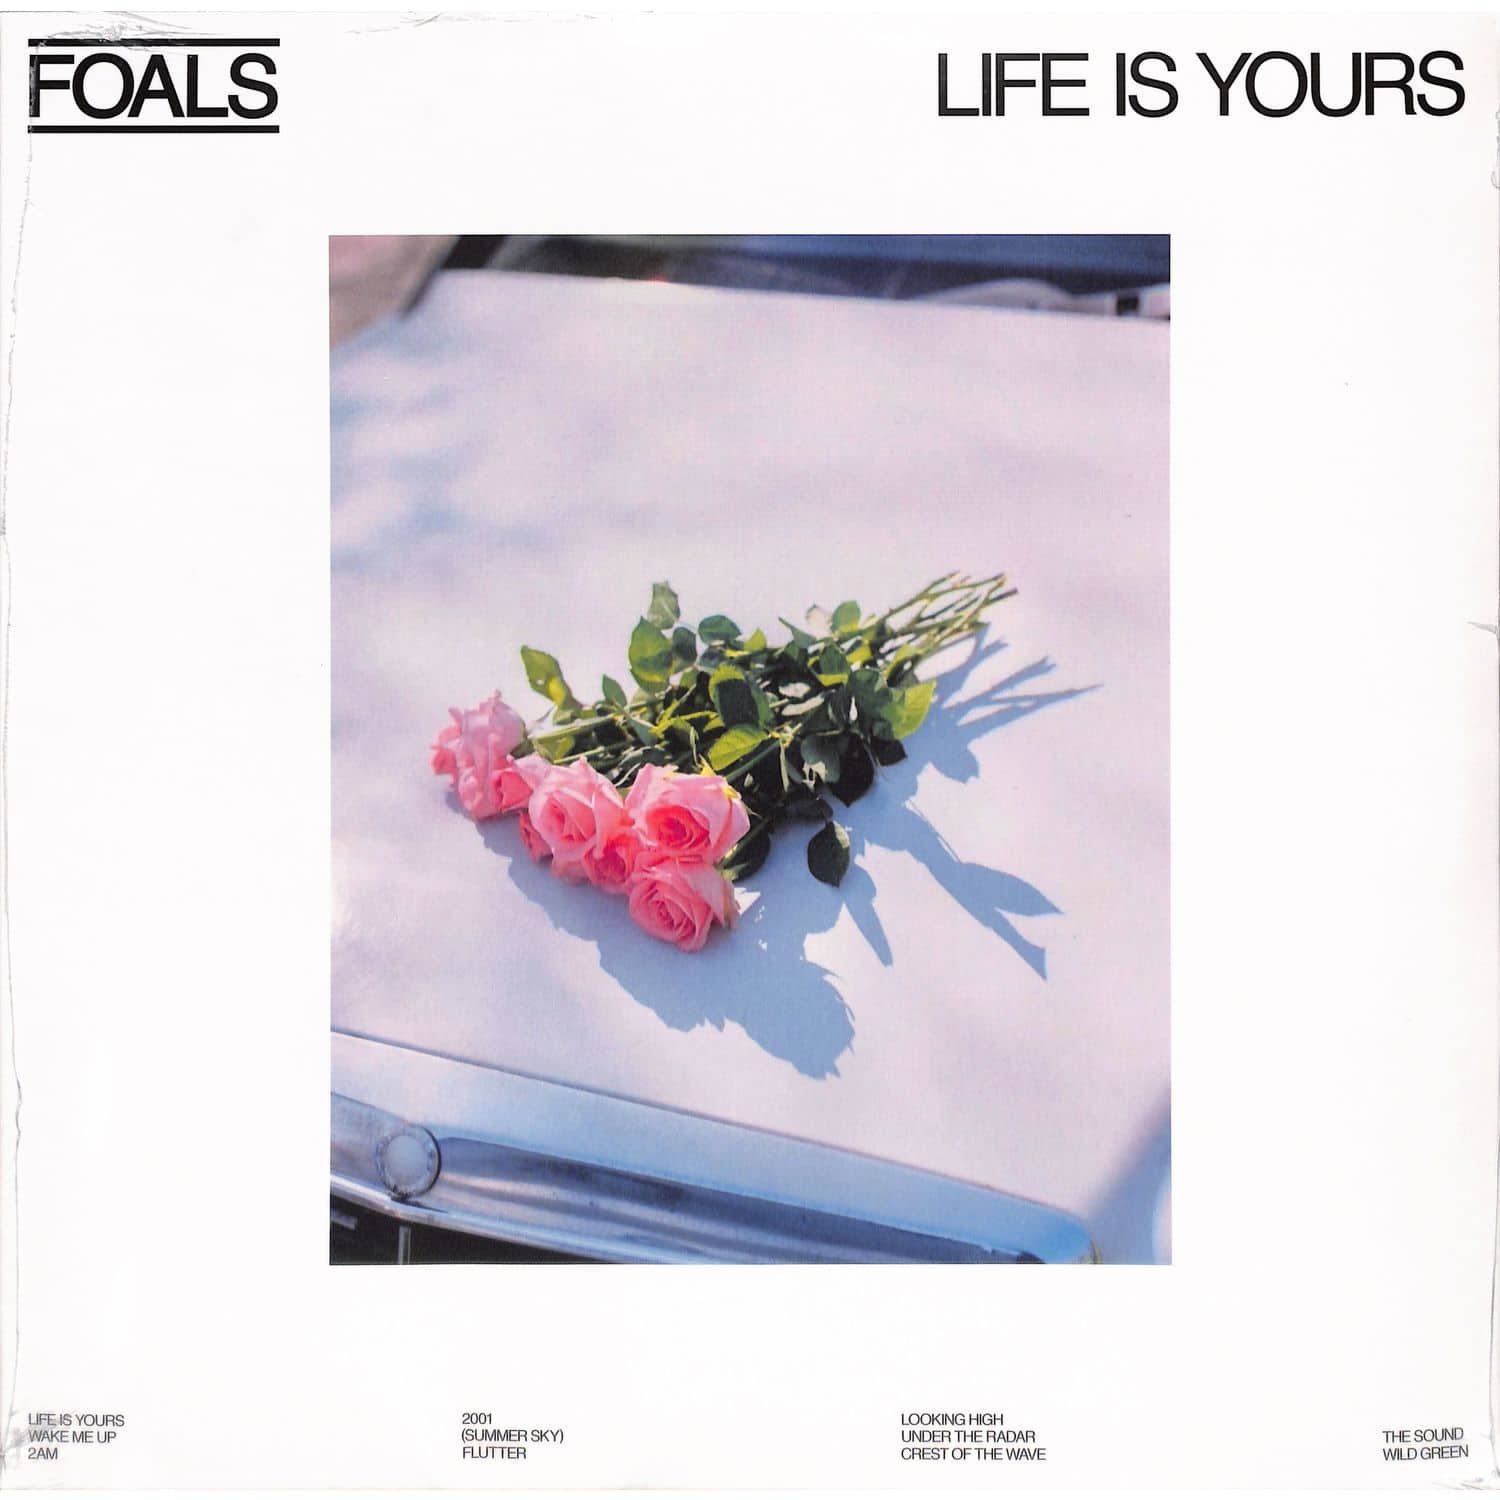 Foals - LIFE IS YOURS